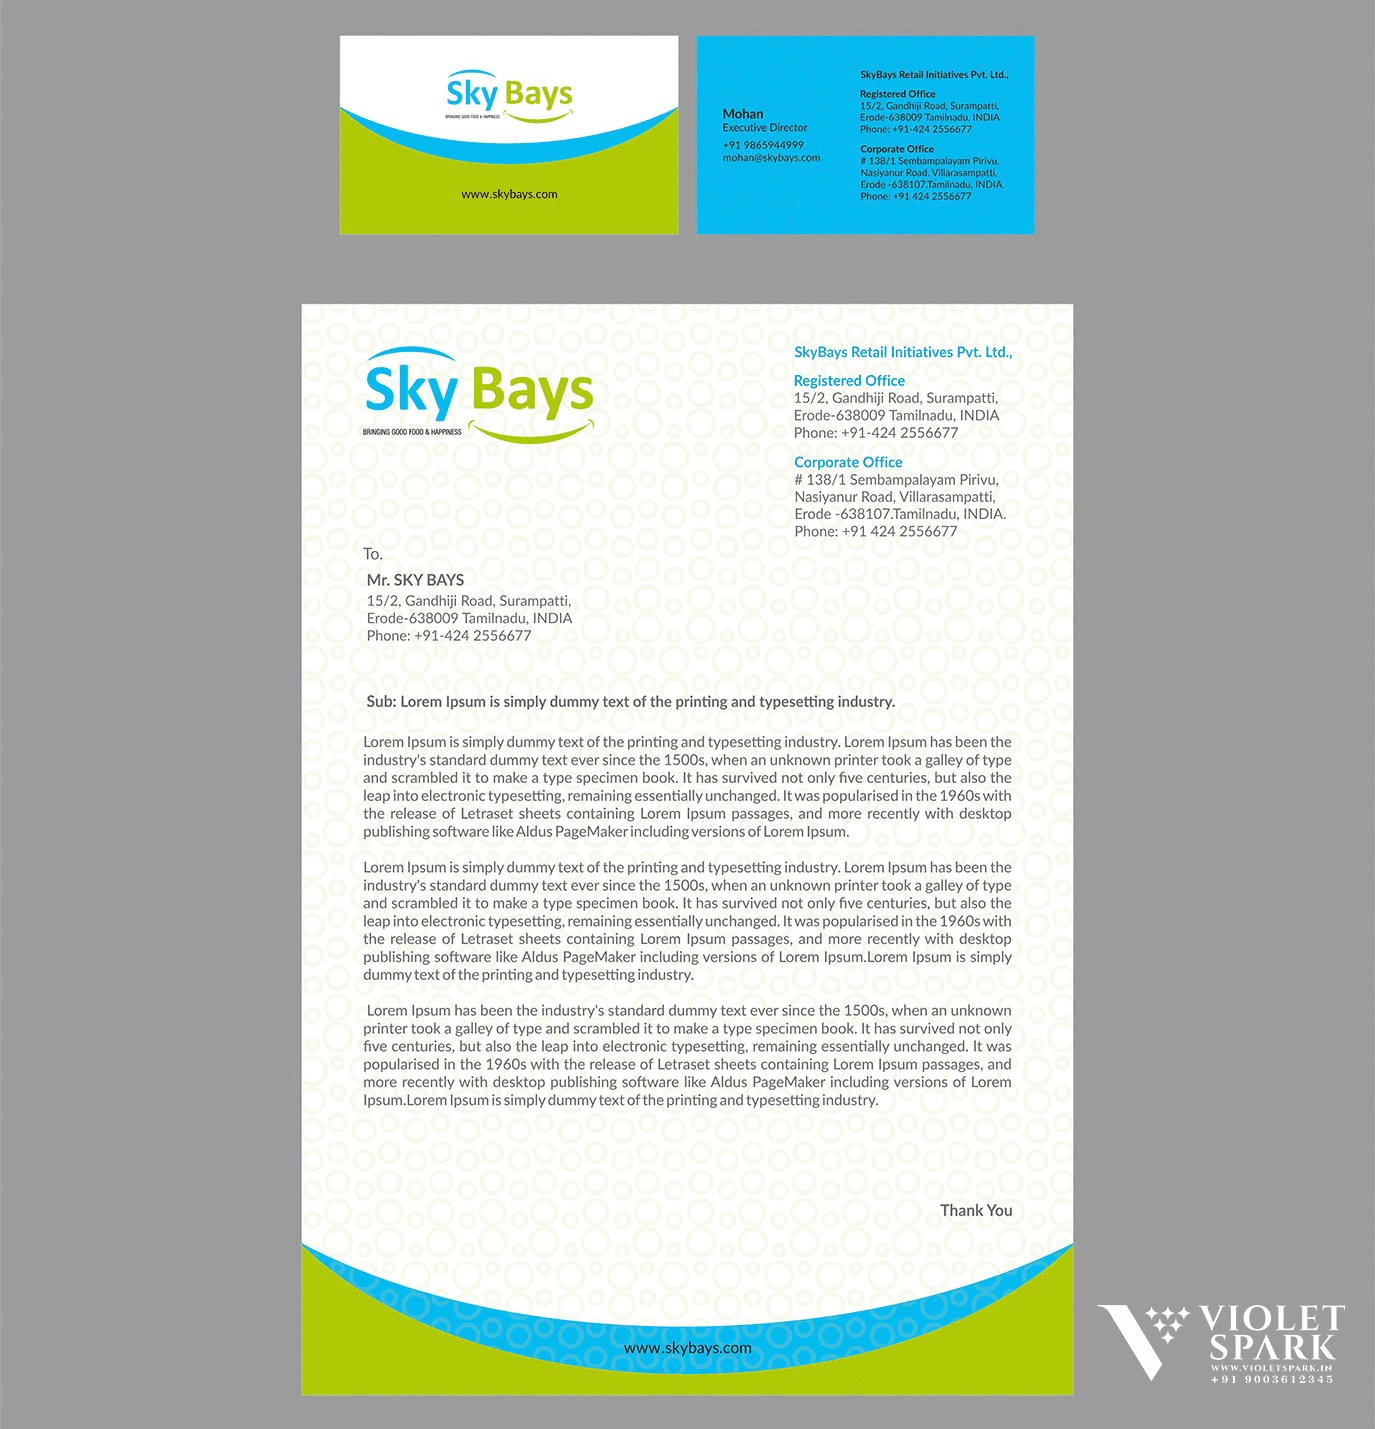 Skybays Stationery Branding & Packaging Design in Chennai Bangalore by Creative Prints thecreativeprints